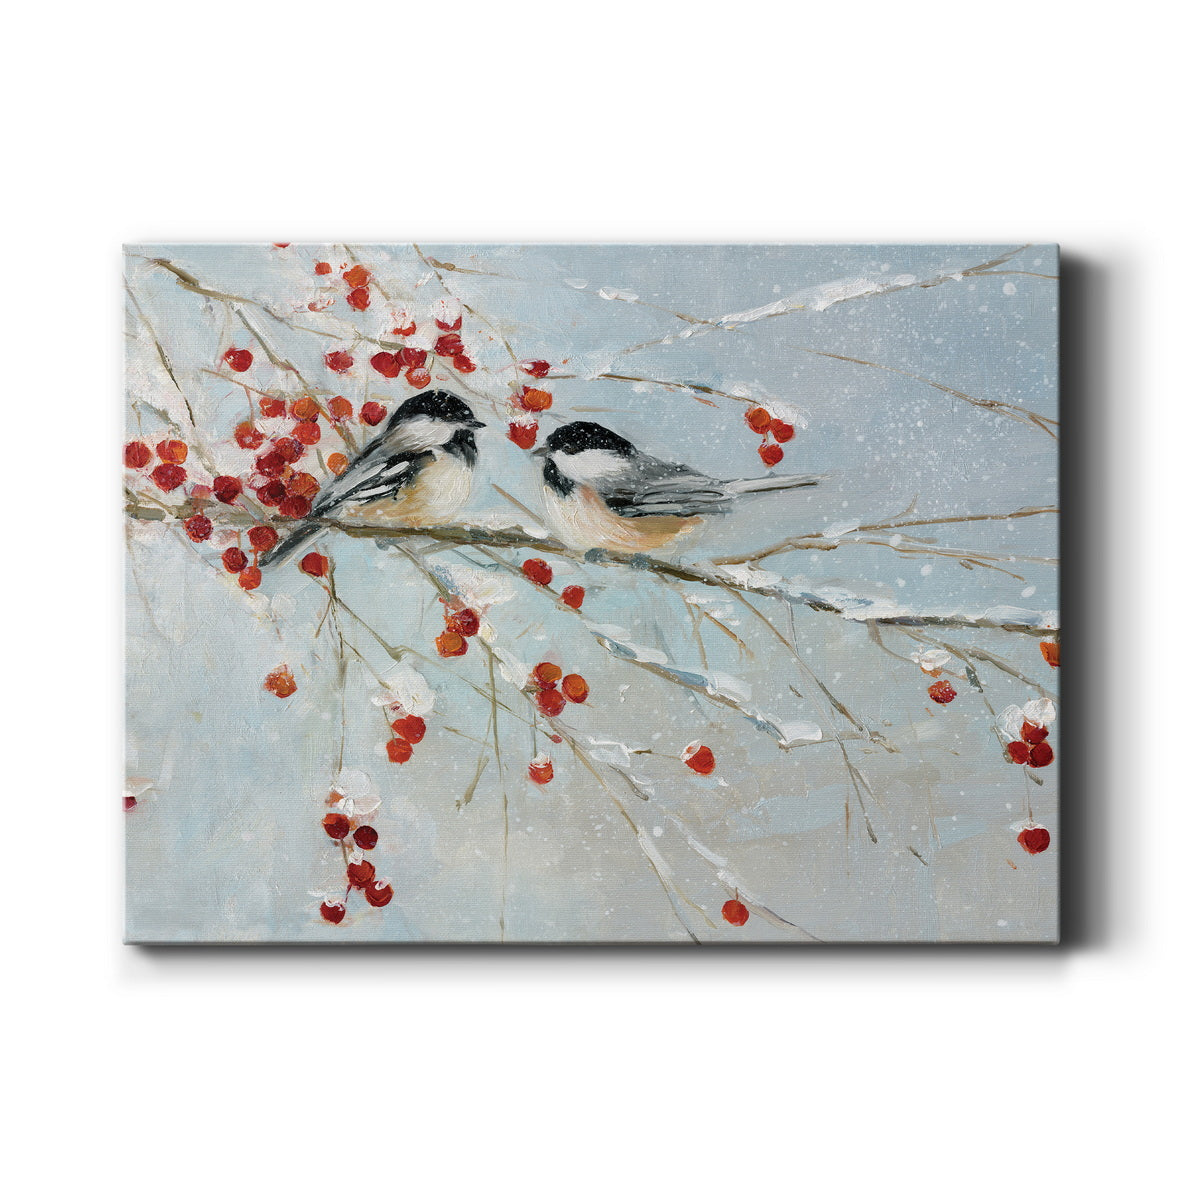 Chickadees in Winter - Premium Gallery Wrapped Canvas  - Ready to Hang